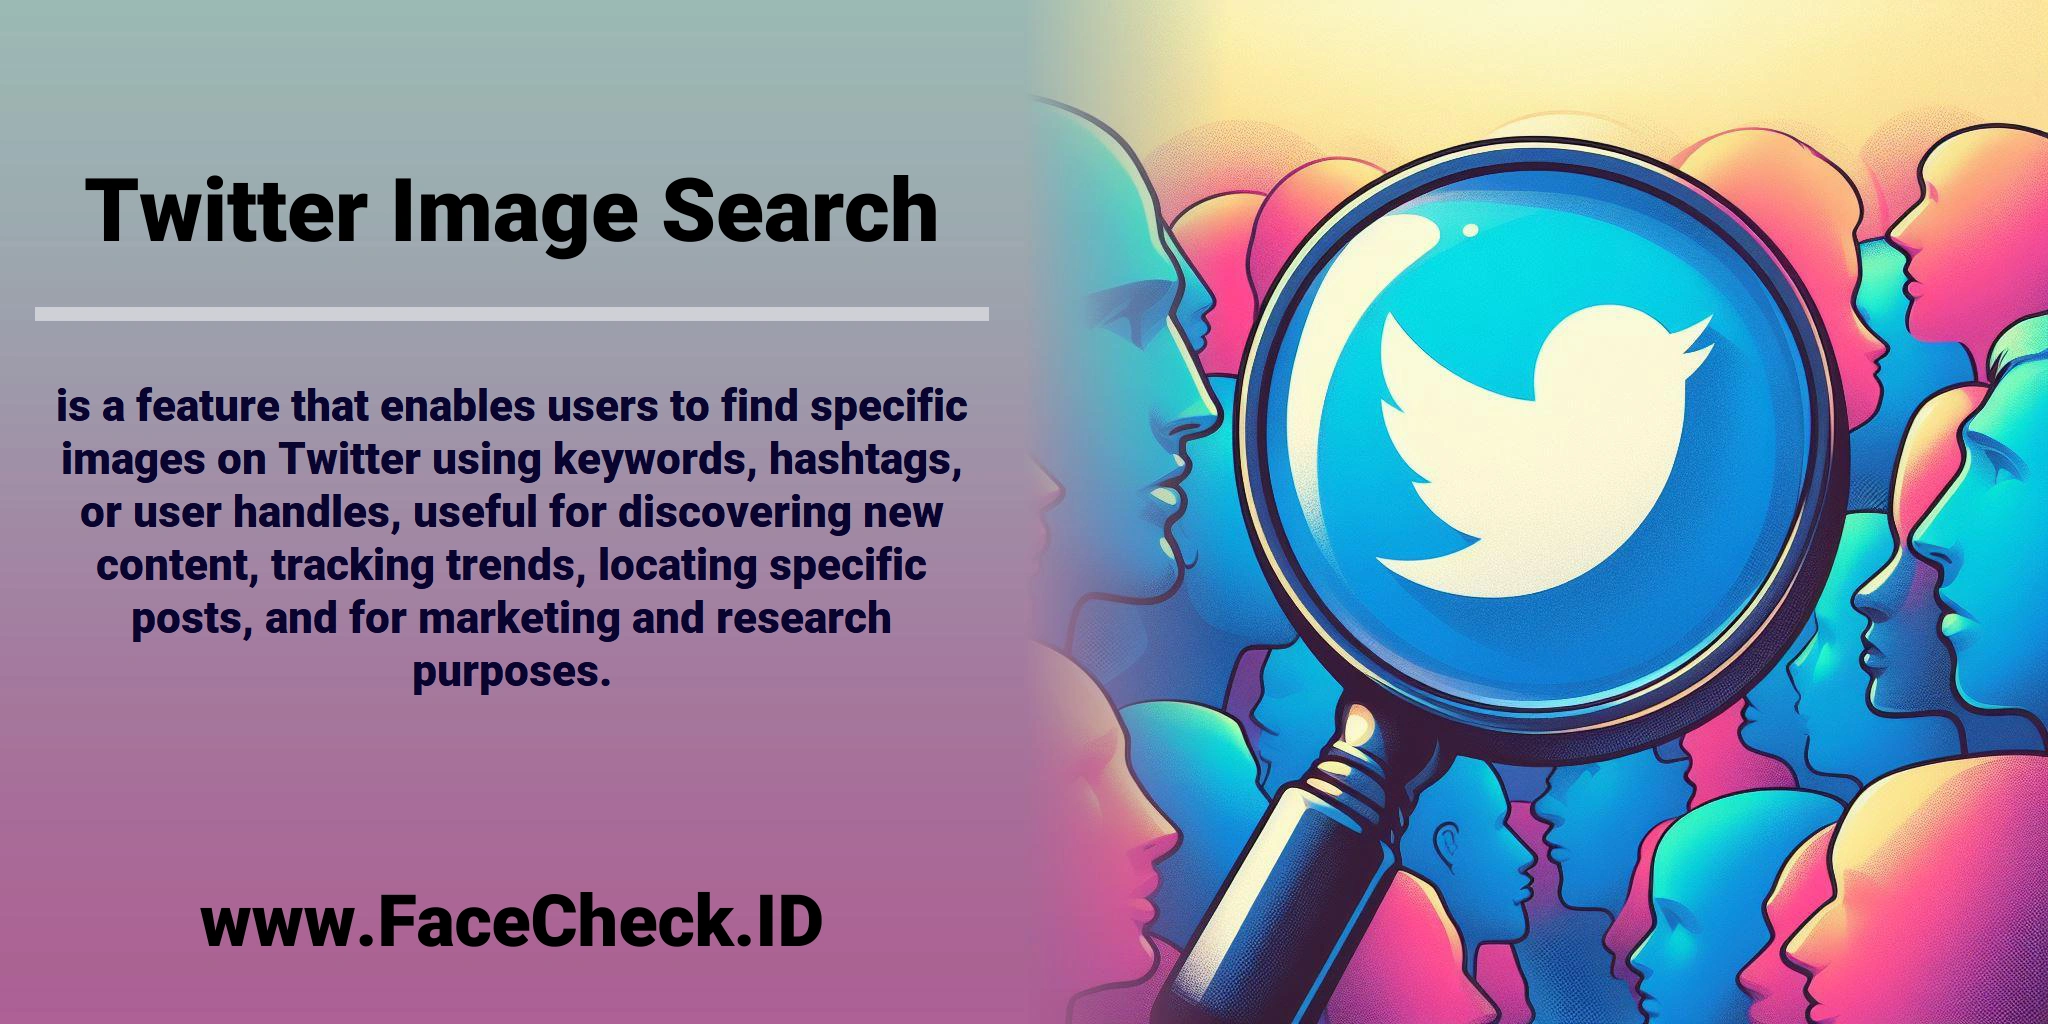 <b>Twitter Image Search</b> is a feature that enables users to find specific images on Twitter using keywords, hashtags, or user handles, useful for discovering new content, tracking trends, locating specific posts, and for marketing and research purposes.